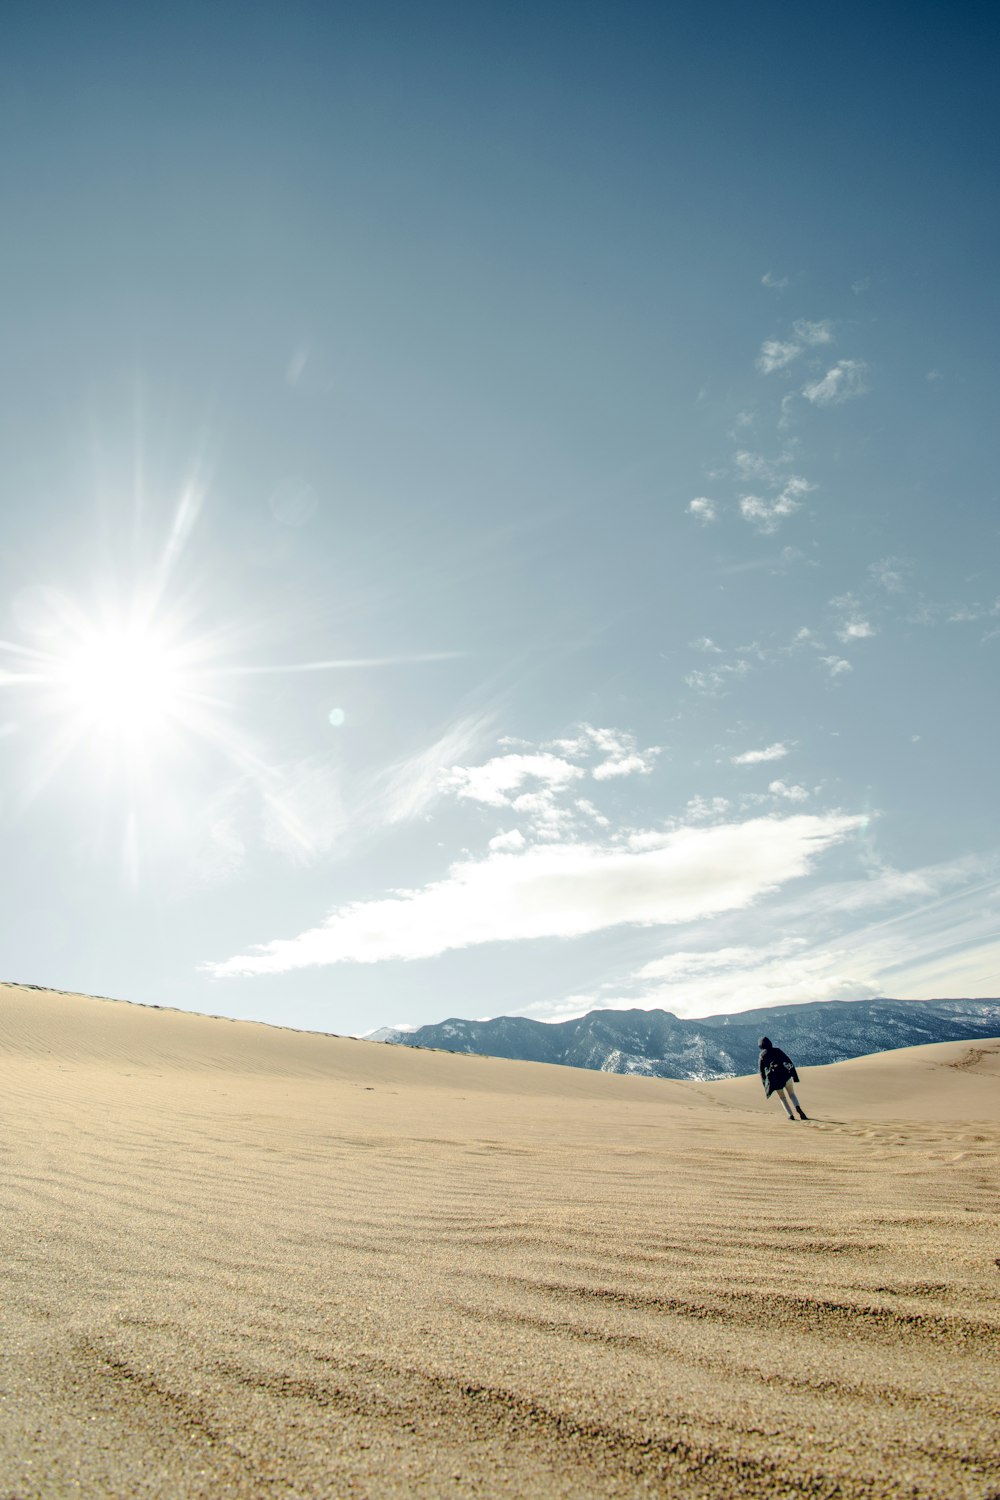 a person riding skis across a sandy field